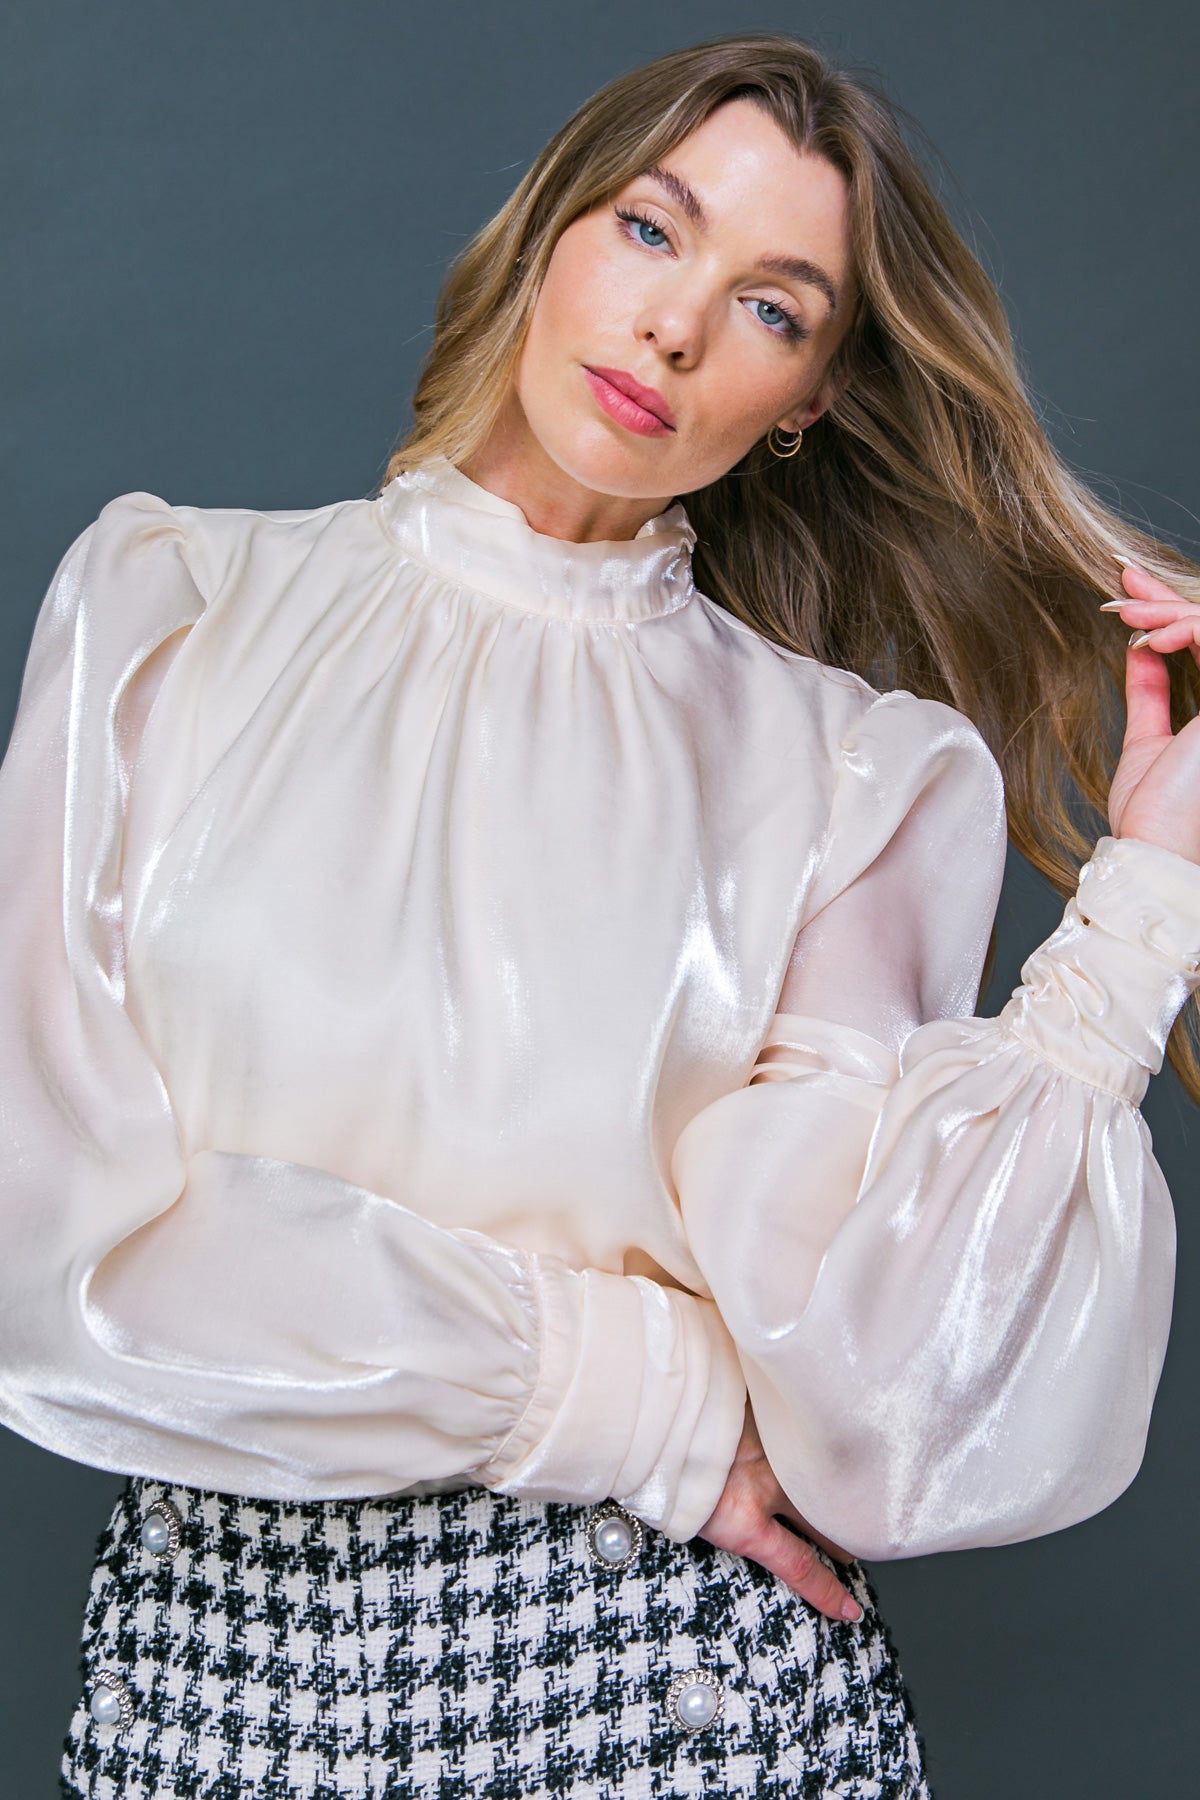 Look classy and chic in our Stay Sophisticated Top! This sophisticated top features a high neckline, long puff sleeves, and a back neck button closure, making it the perfect way to amp up a work outfit. Dress it up with a statement necklace to feel fierce and fabulous!